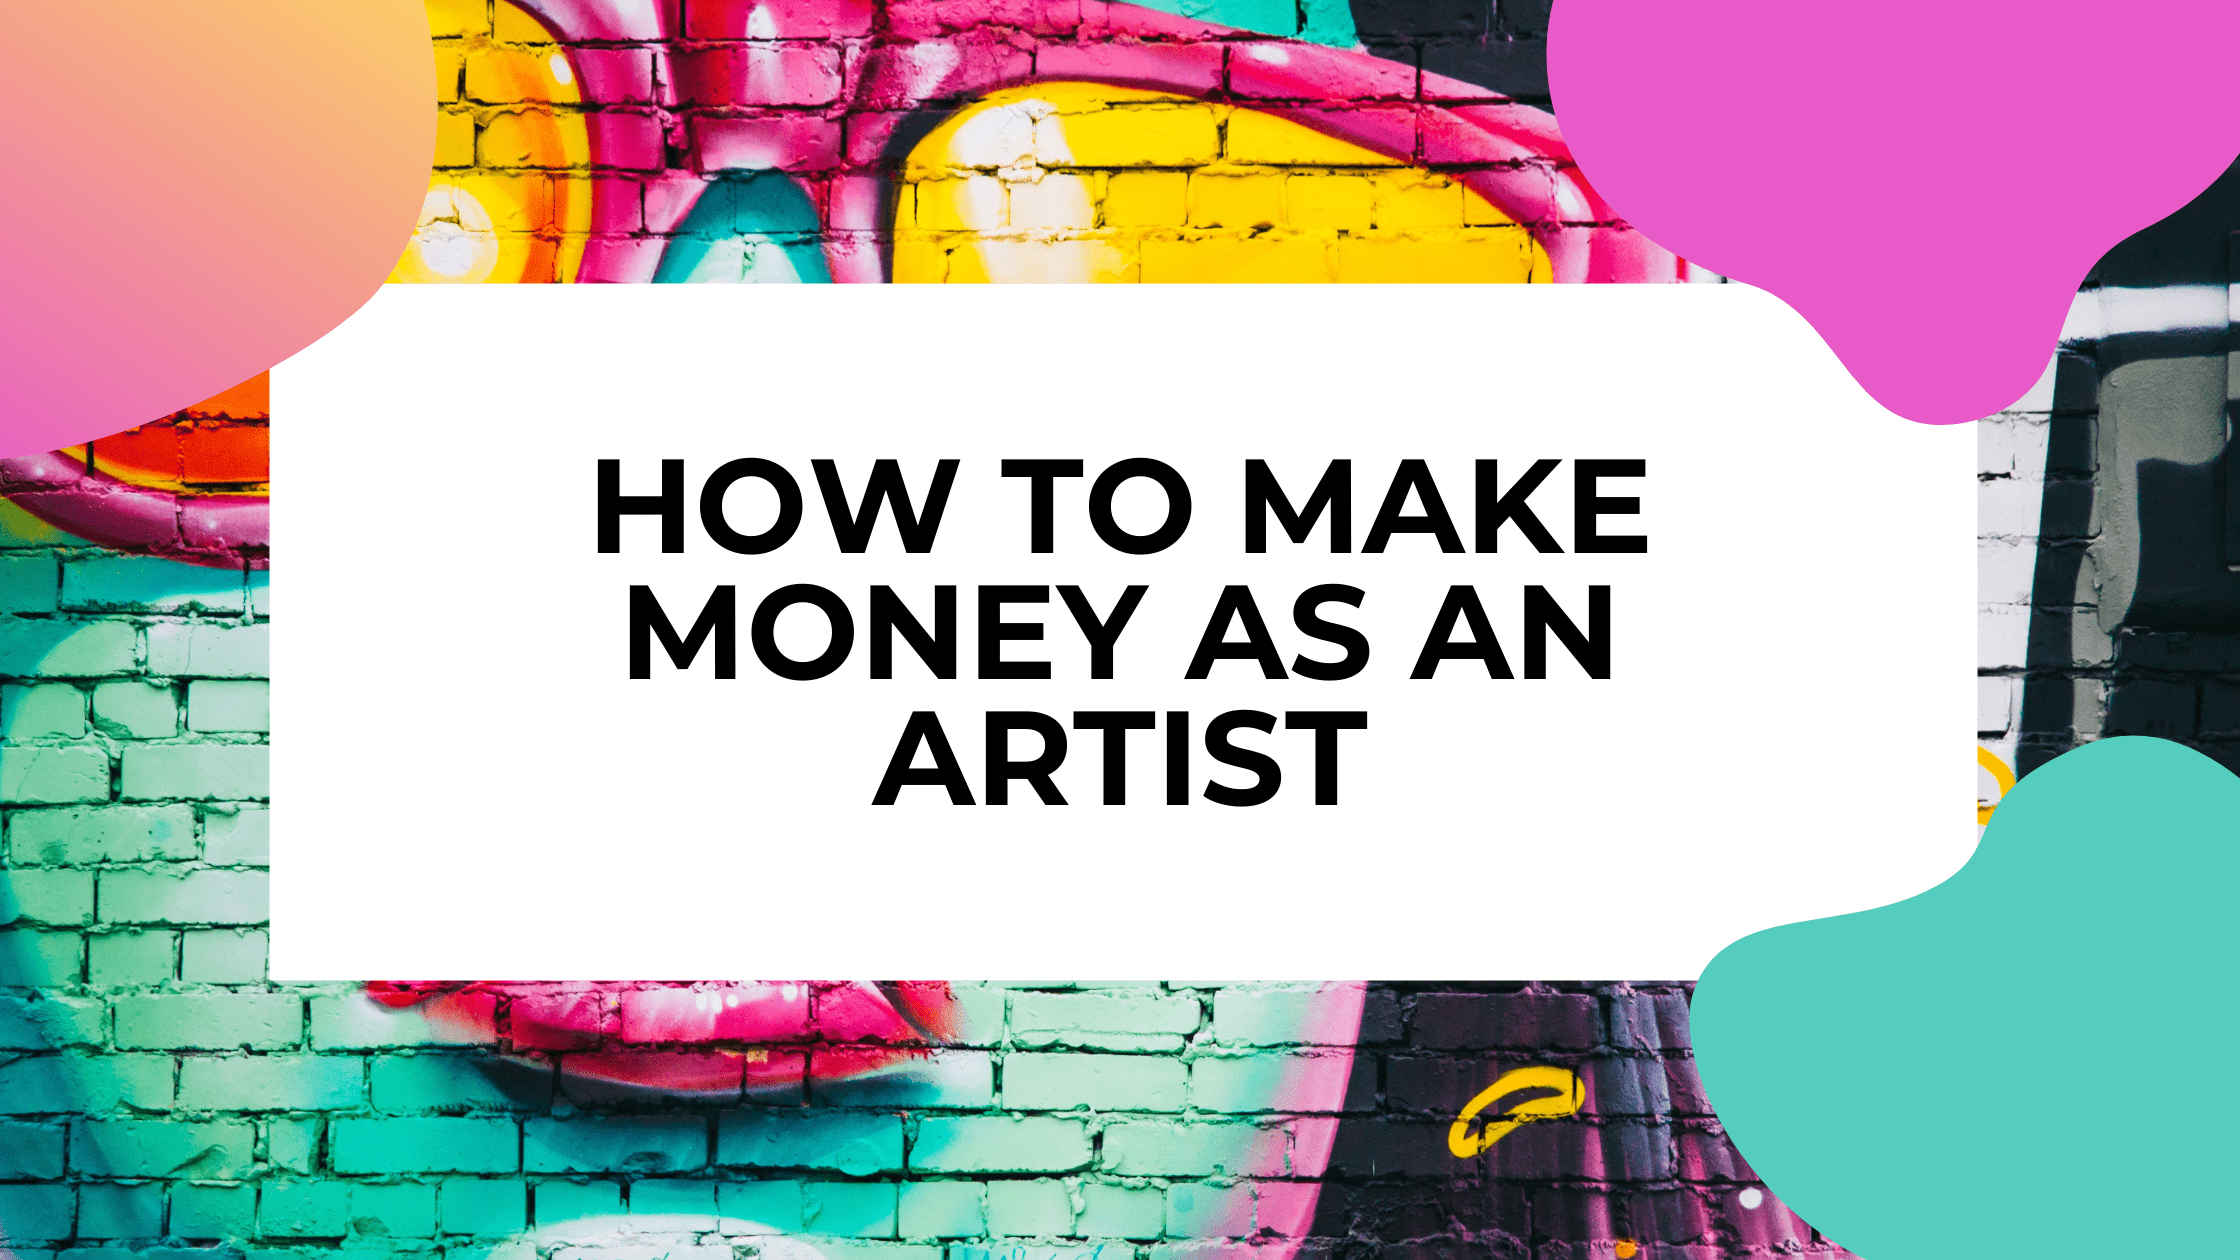 make money as an artist featured image with a mural and title text